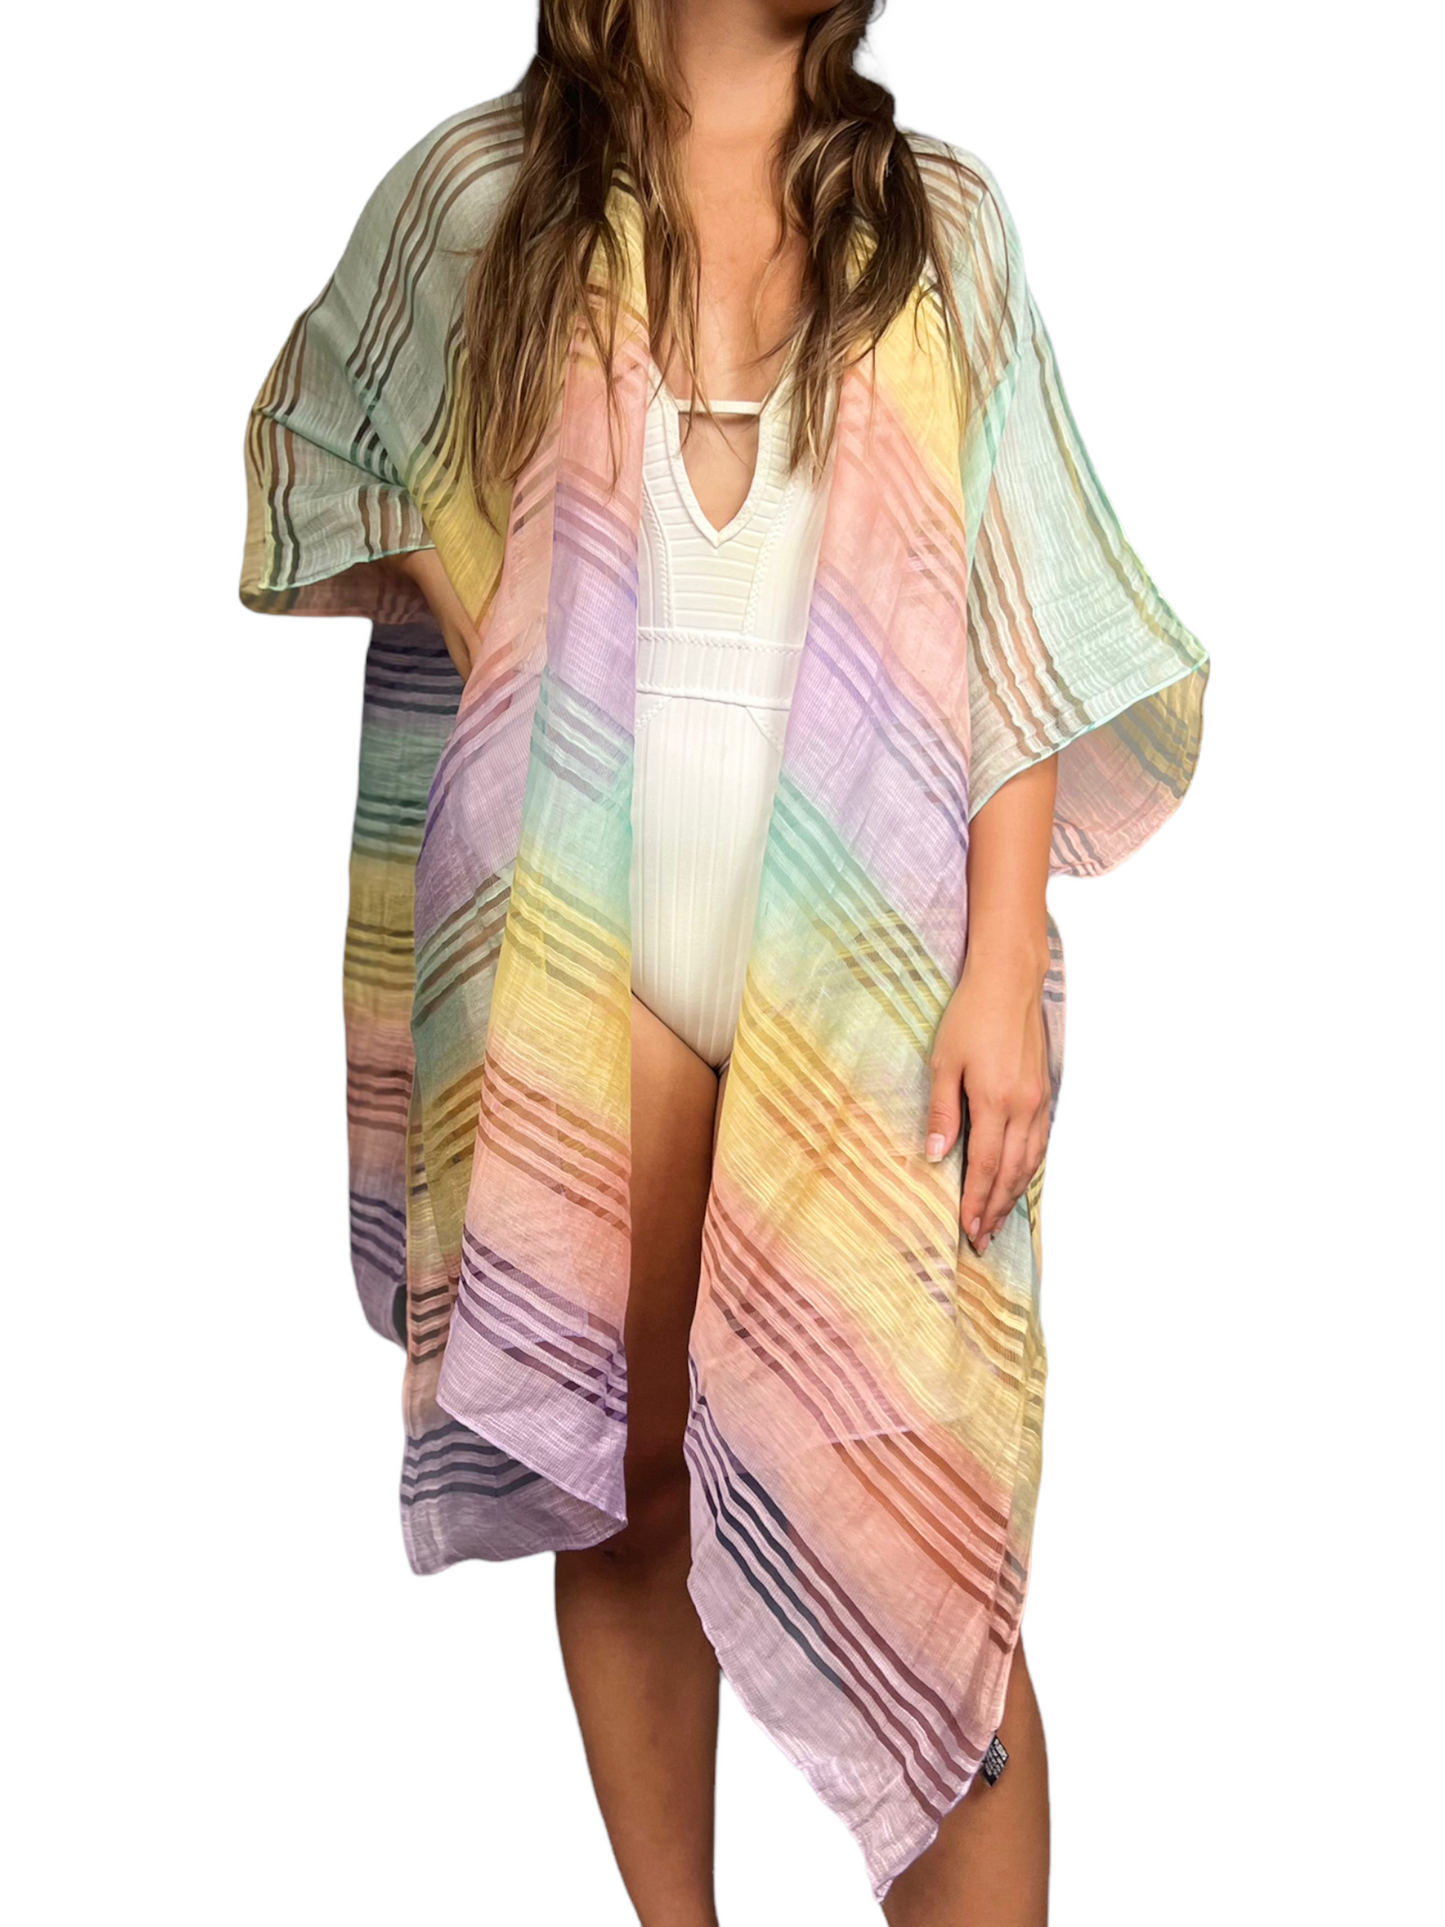 Cancun Women's Cover-Up | Silk- Made By Hand